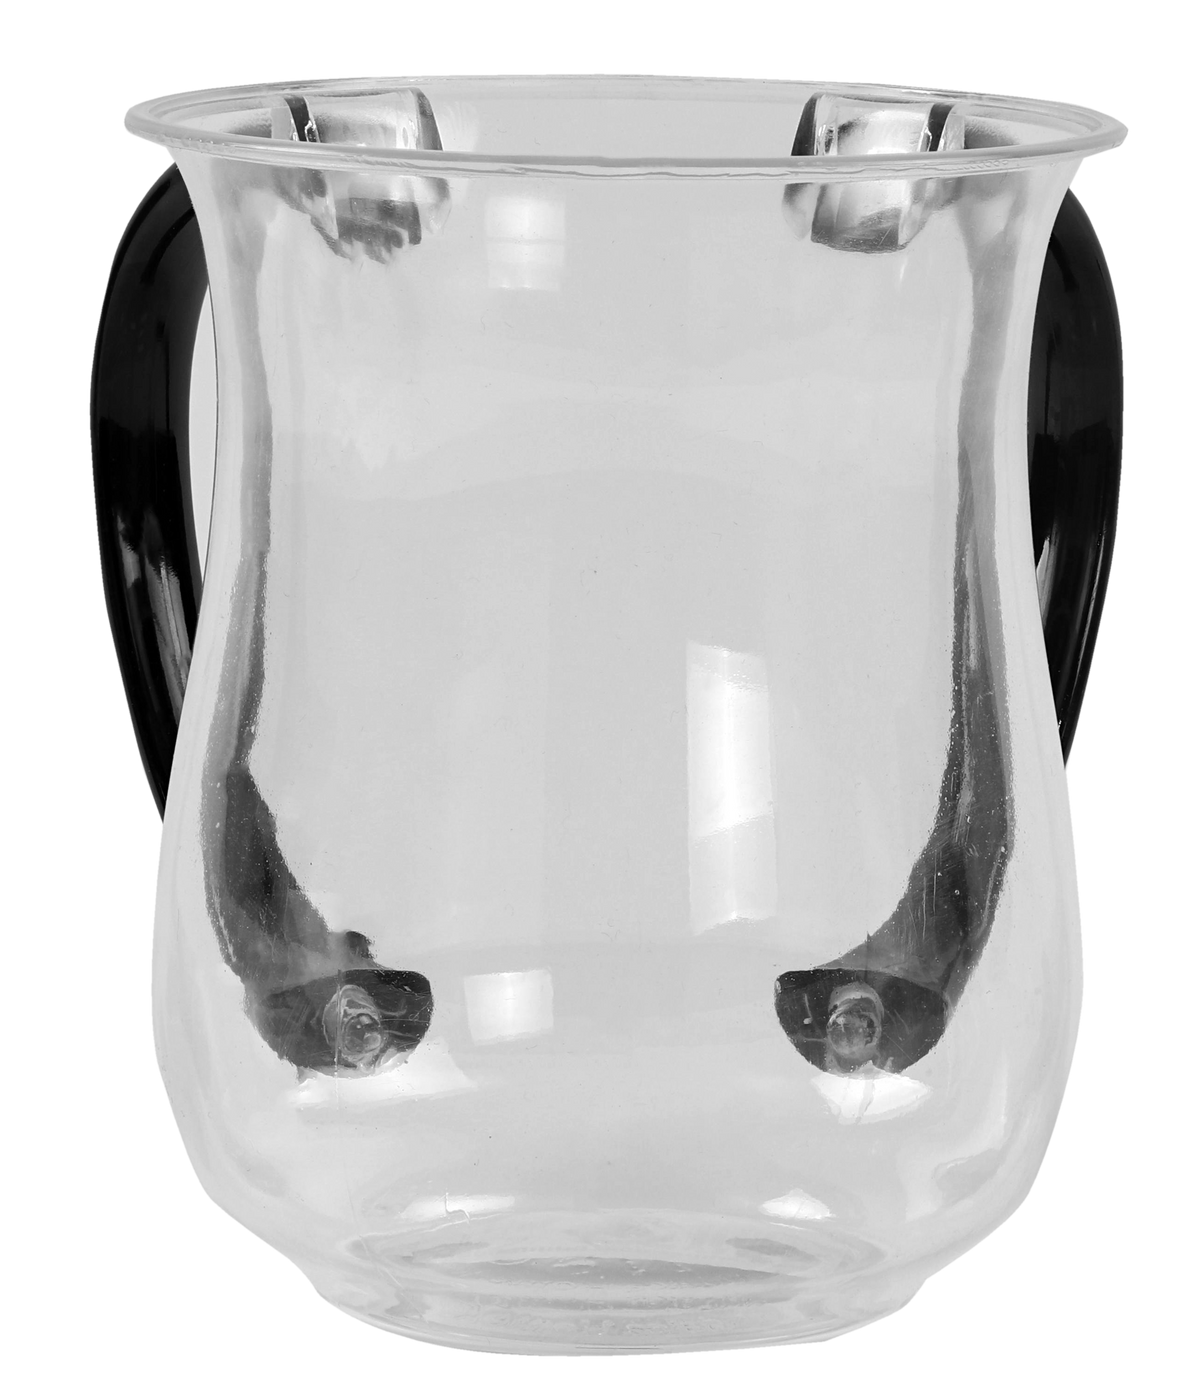 A&M - Acrylic Wash Cup Clear With Black Handles, 5"